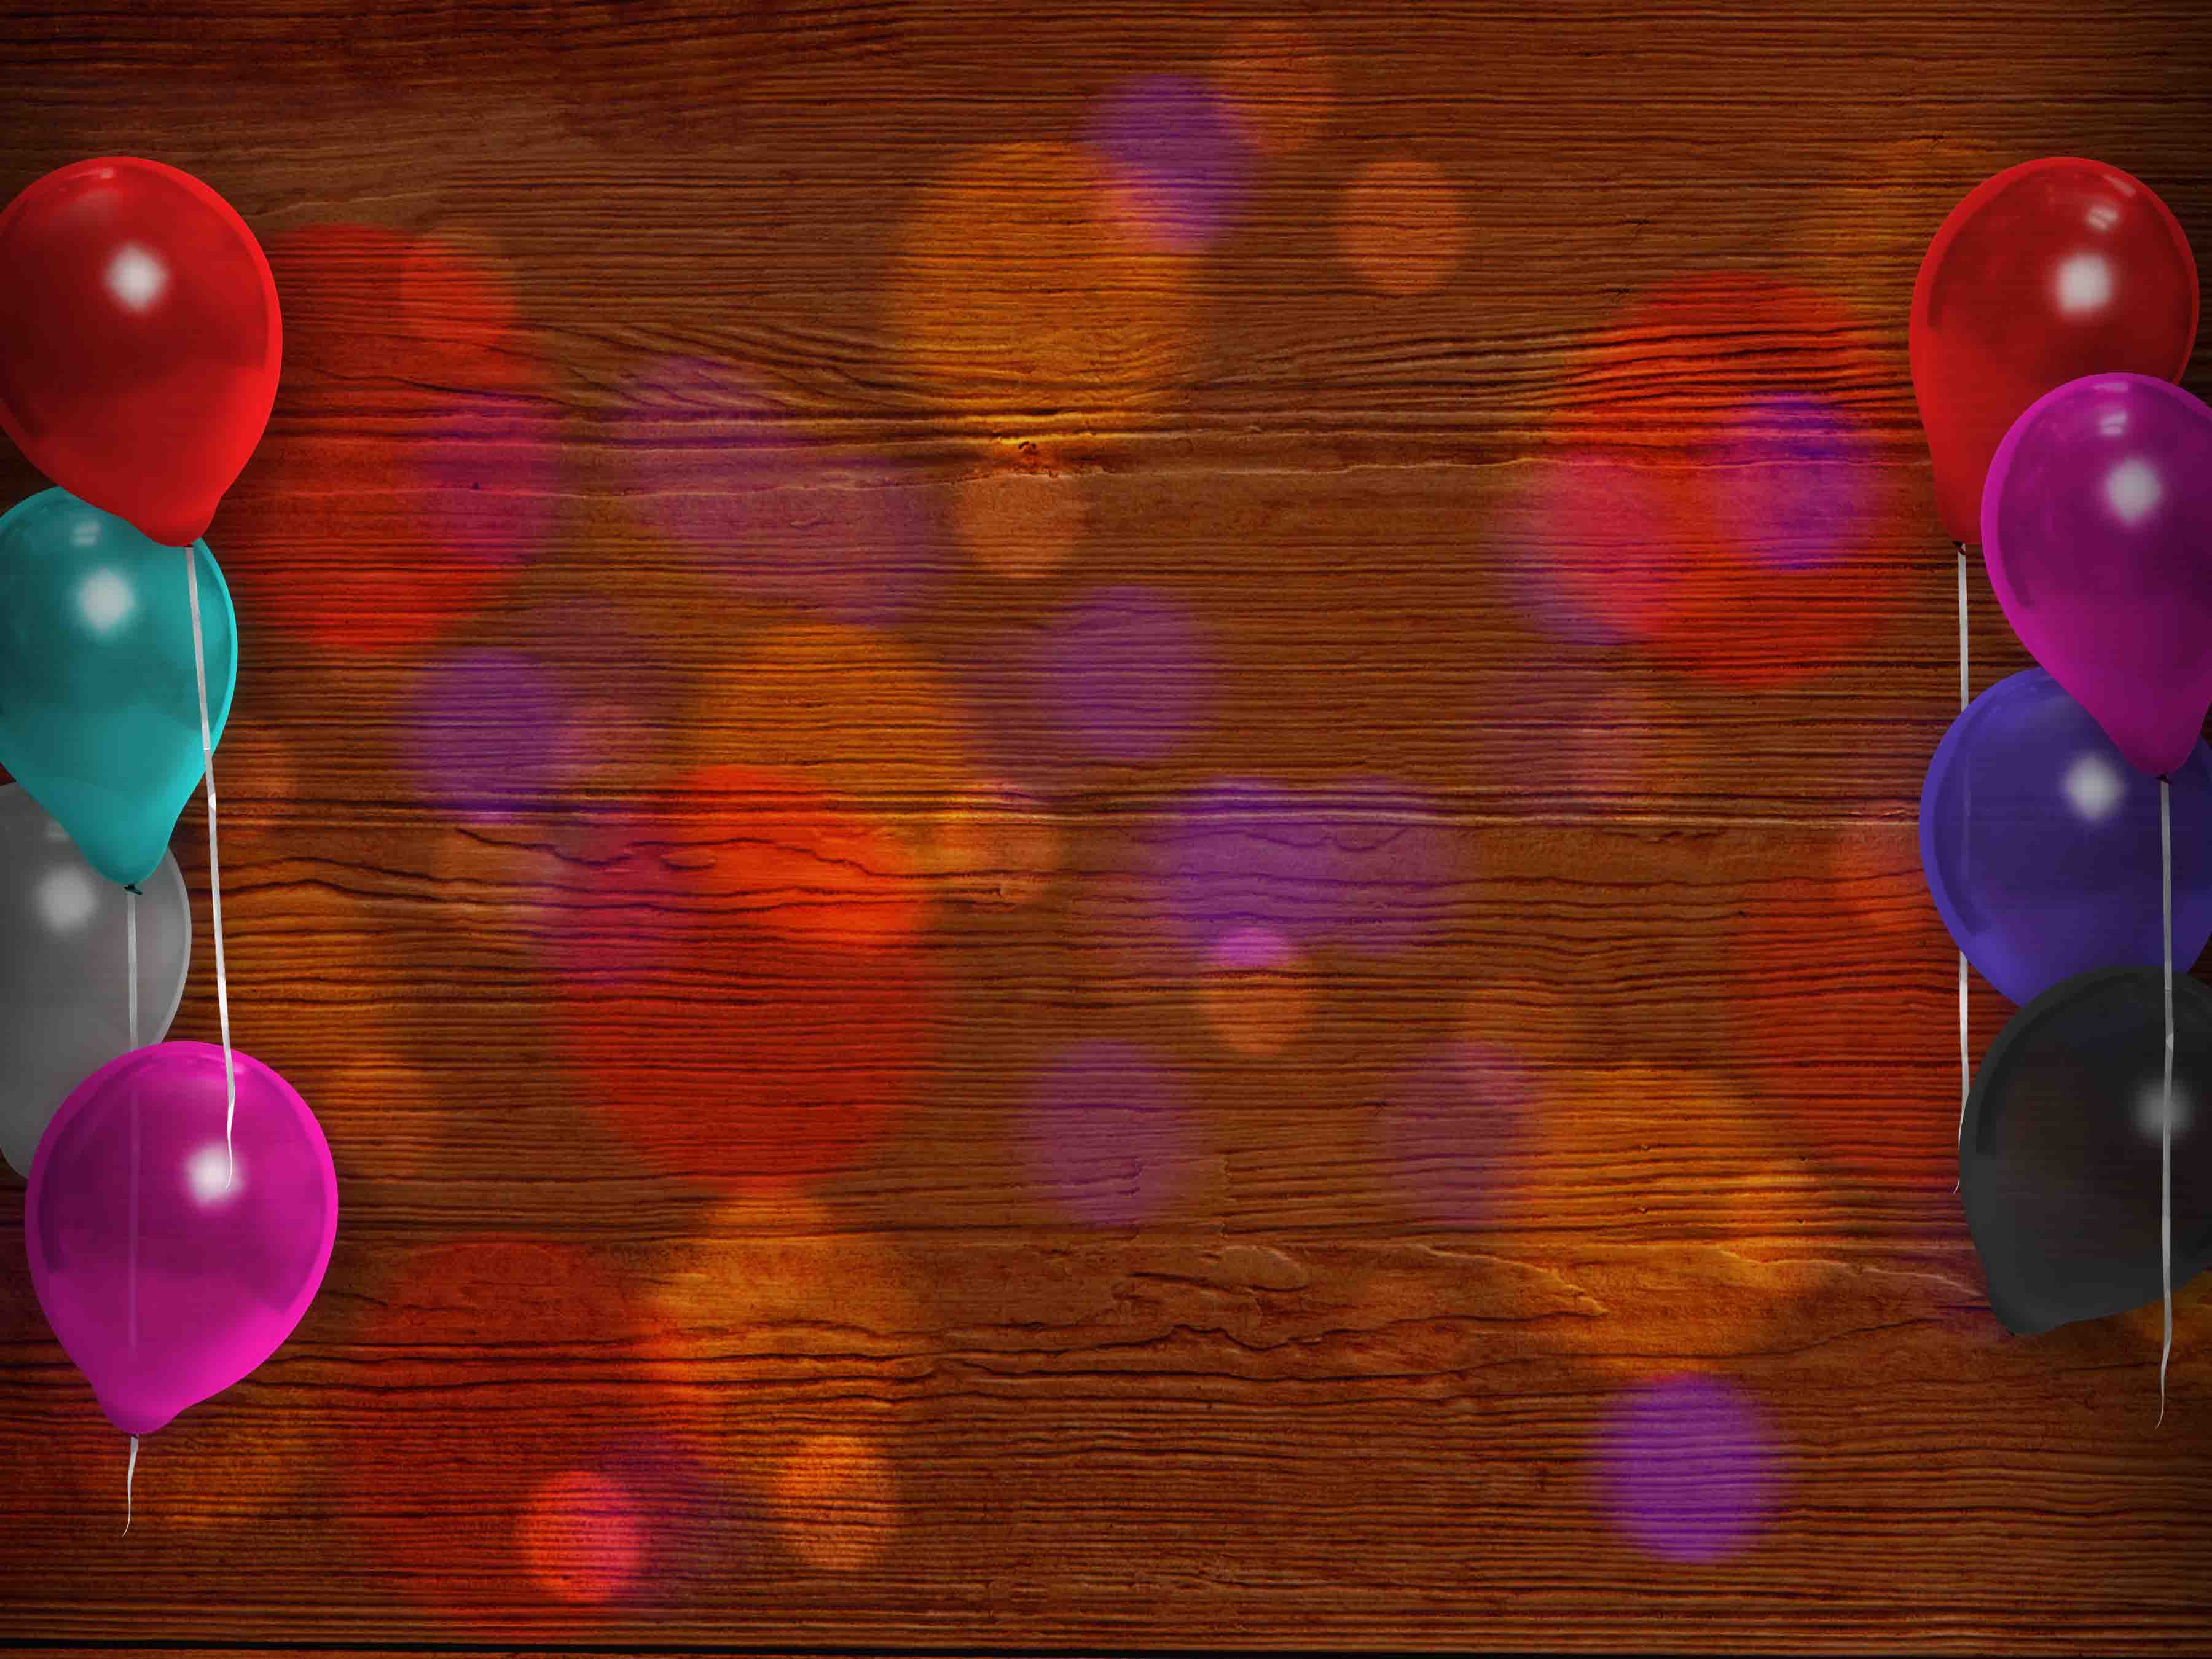 Wood background with balloons